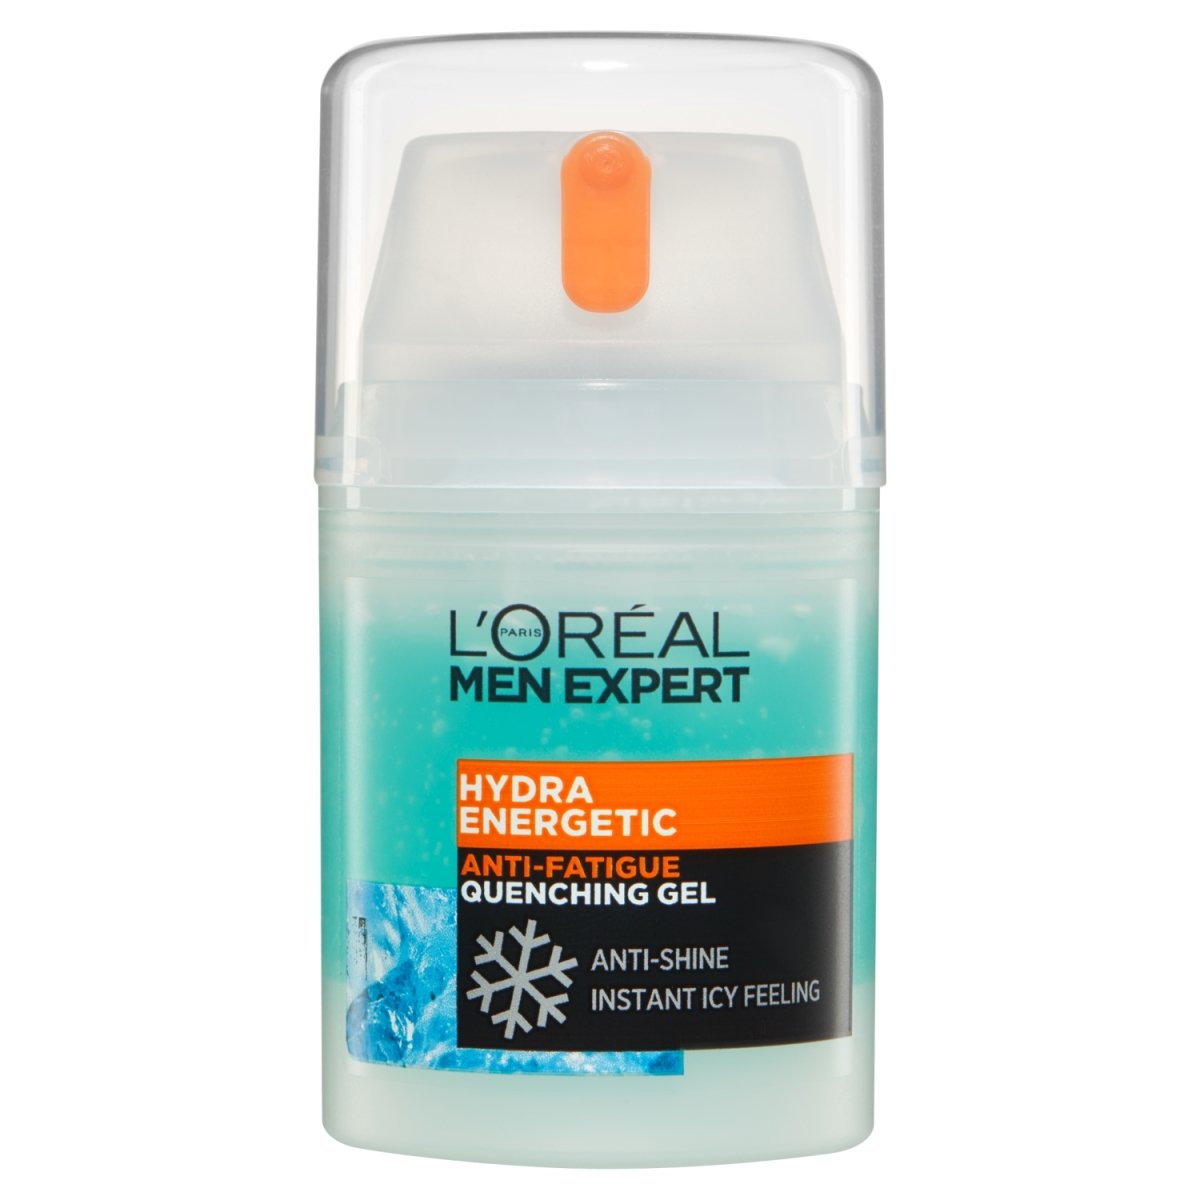 L'Oreal Men Expert Hydra Energetic Quenching Gel - Intamarque 3600522334200